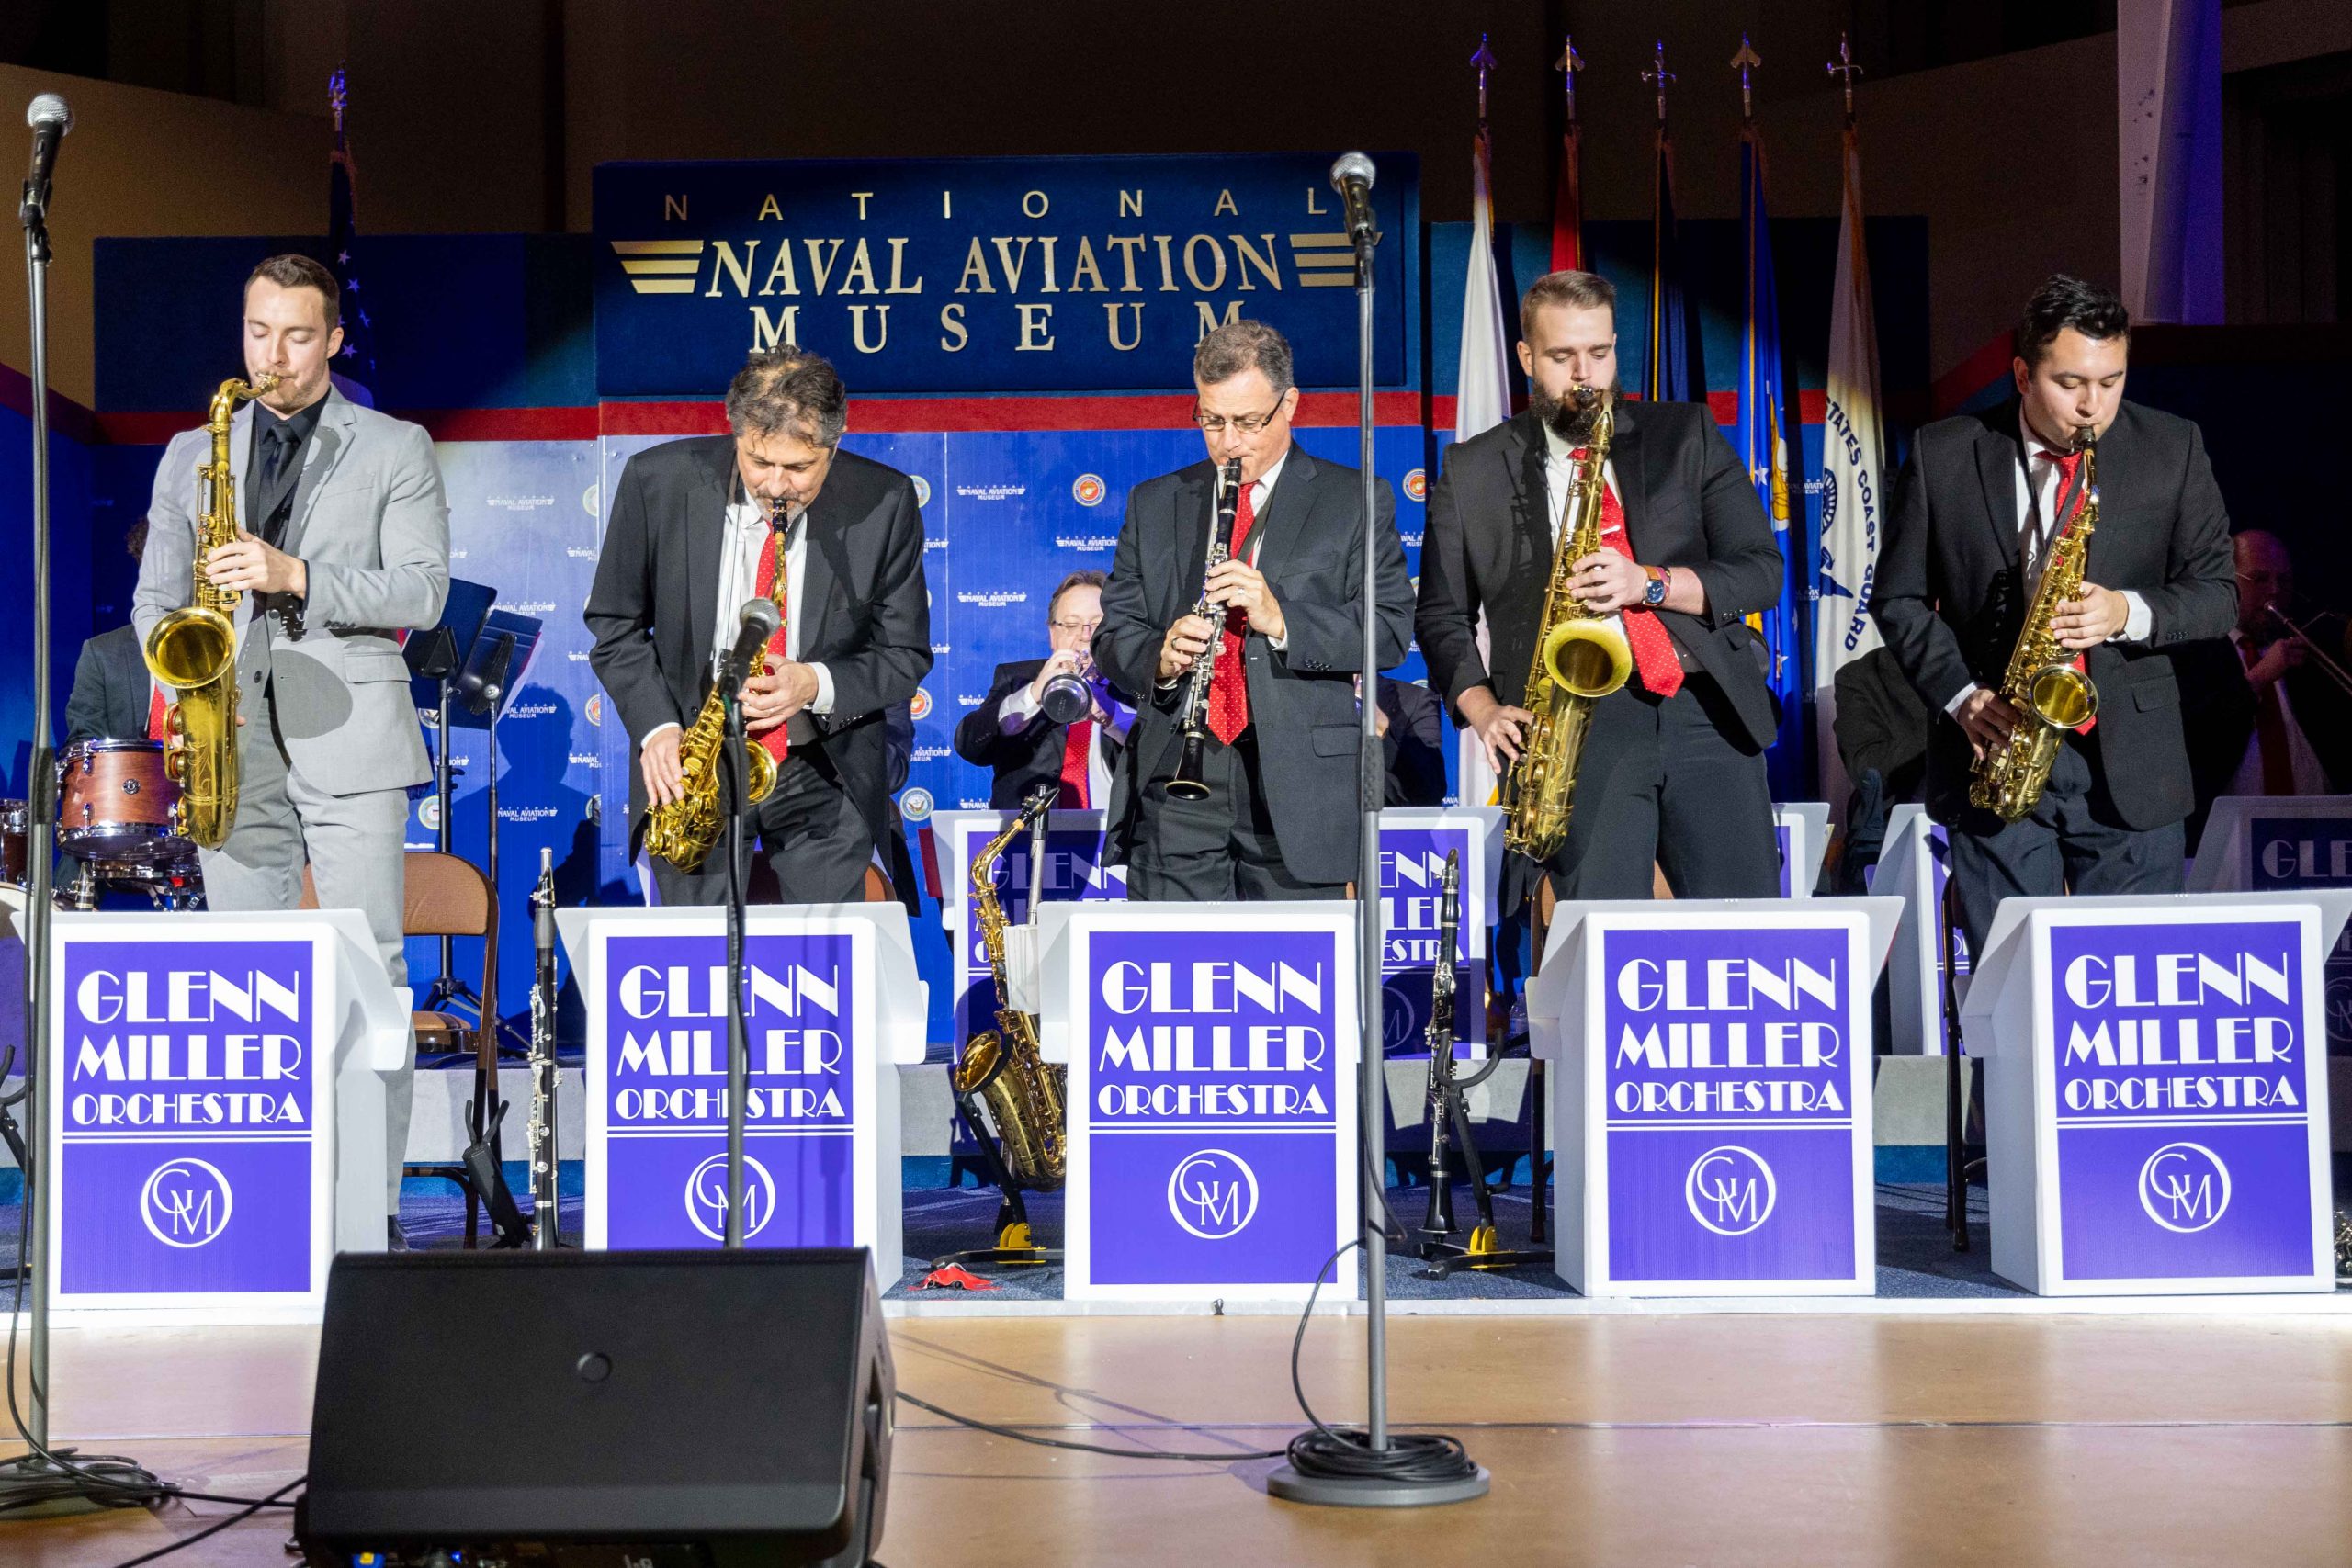 Glenn Miller Orchestra performing at the National Naval Aviation Museum in 2022